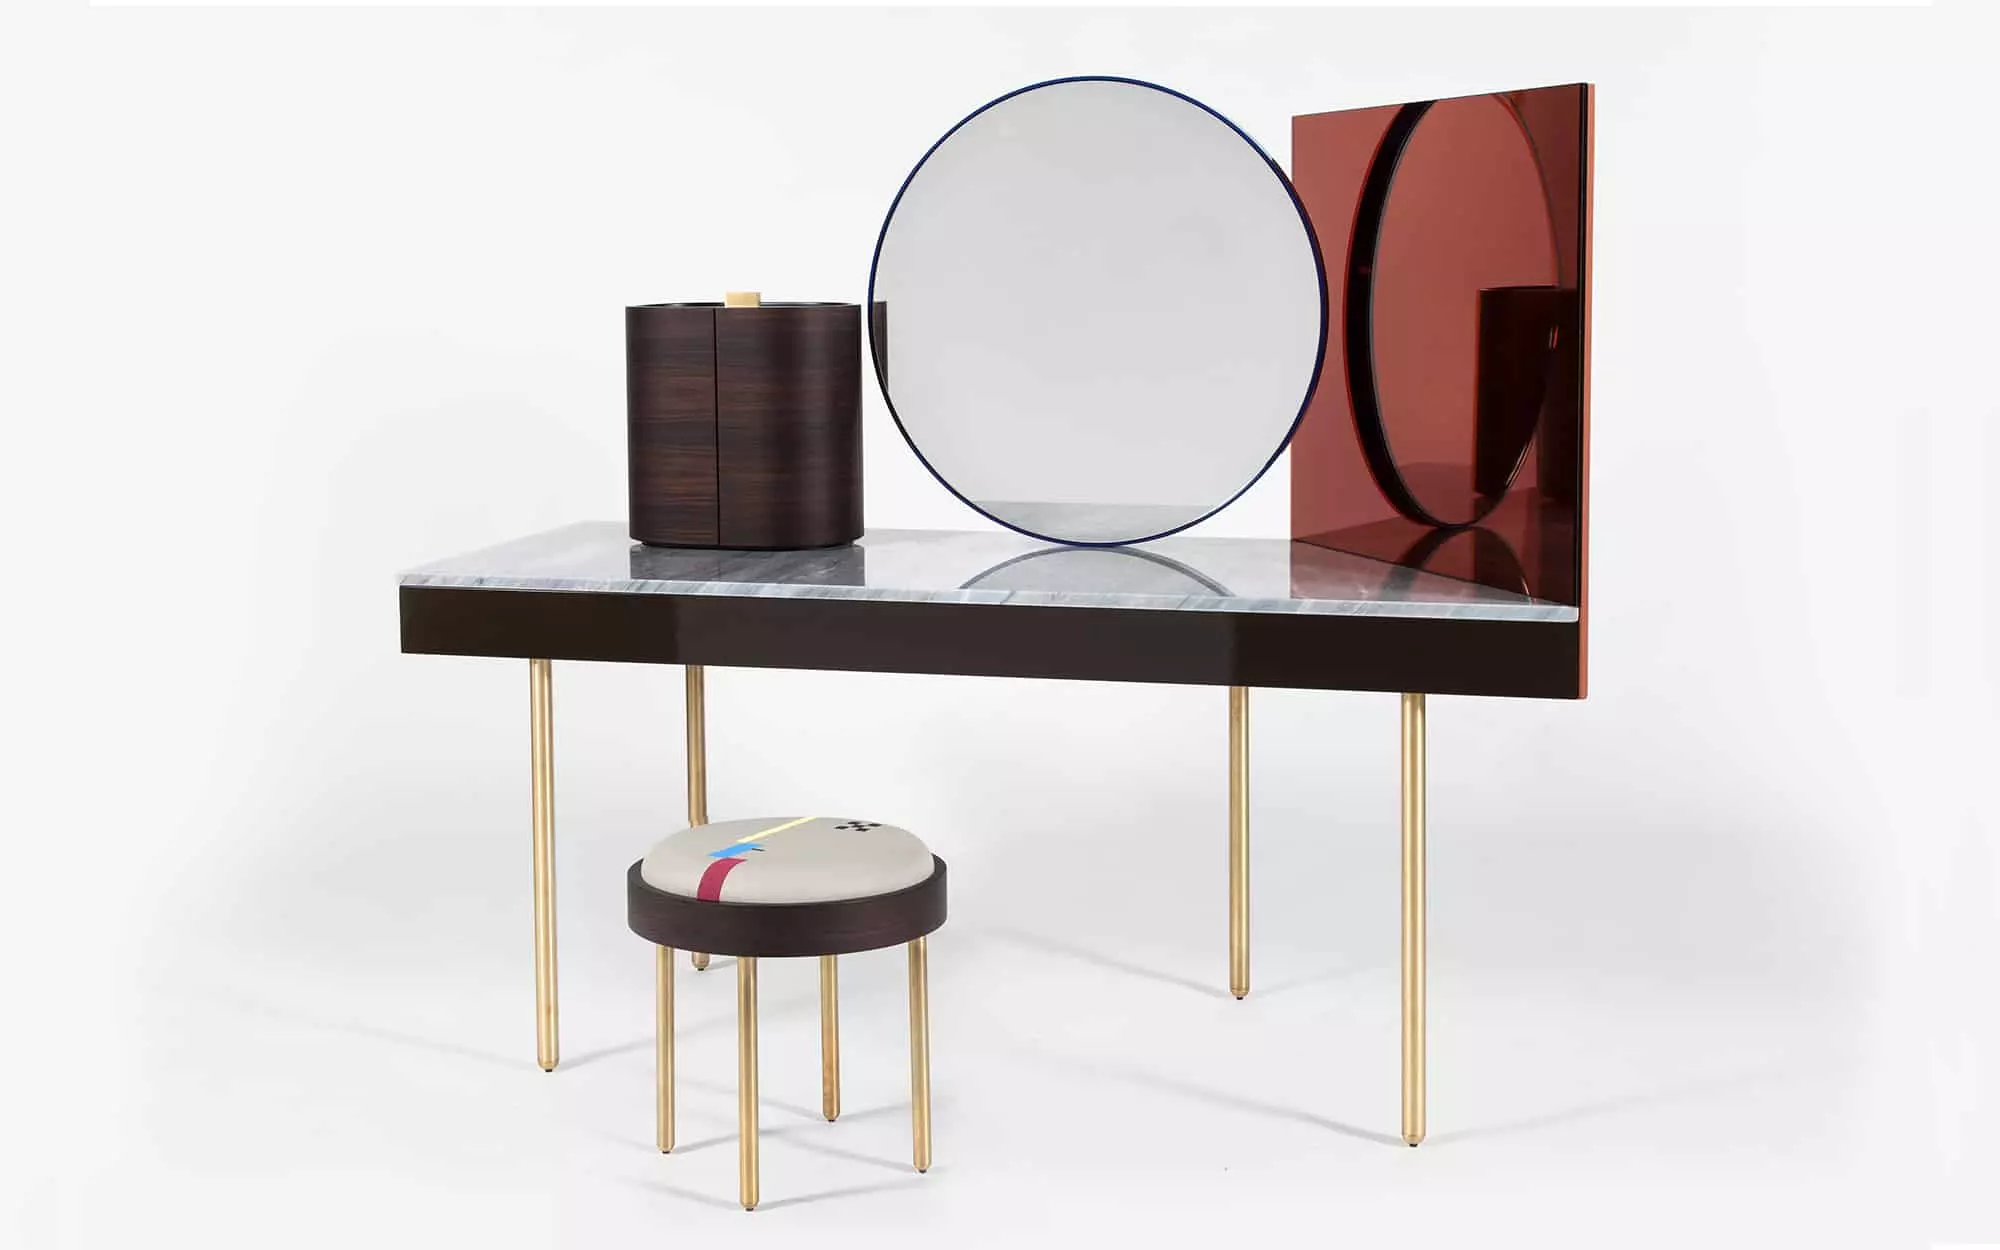 Chandlo Dressing Table - Doshi Levien - Daybed & Long Chair - Galerie kreo